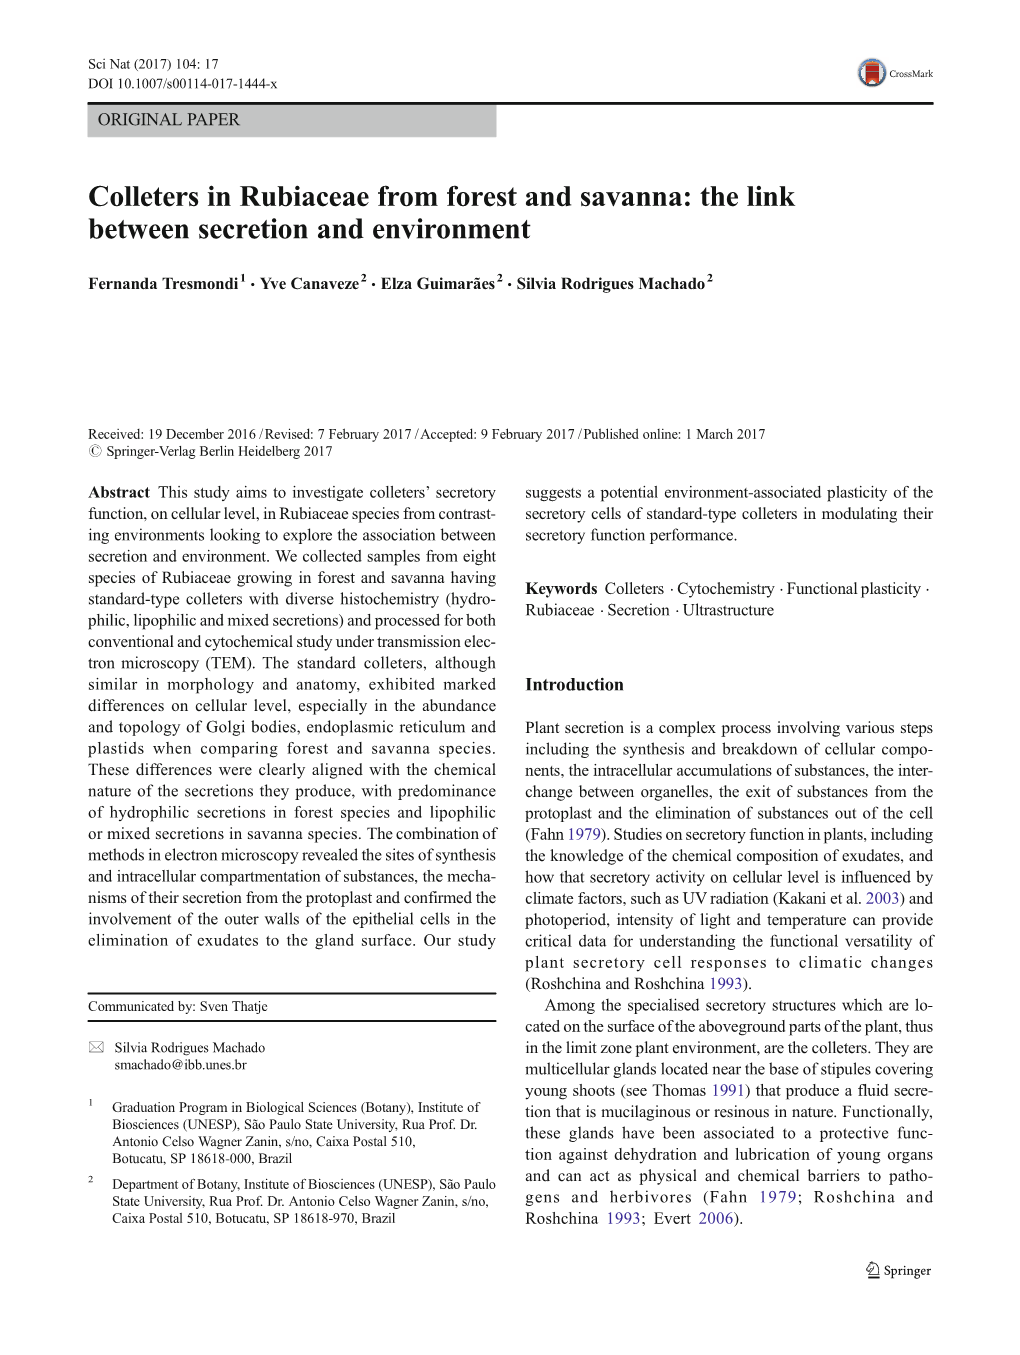 Colleters in Rubiaceae from Forest and Savanna: the Link Between Secretion and Environment